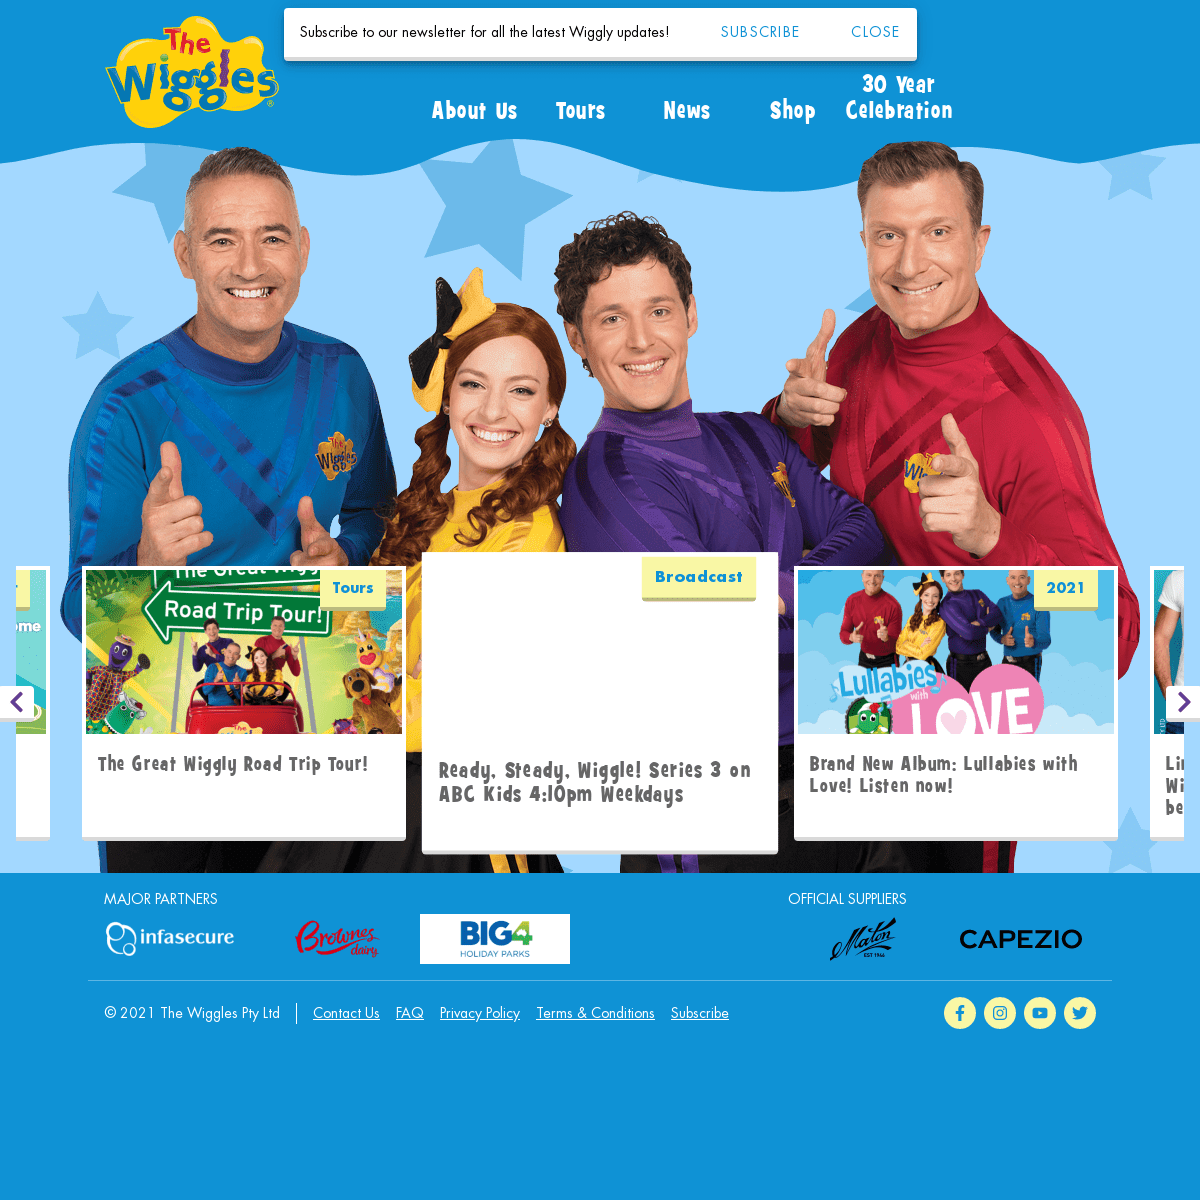 A complete backup of https://thewiggles.com.au